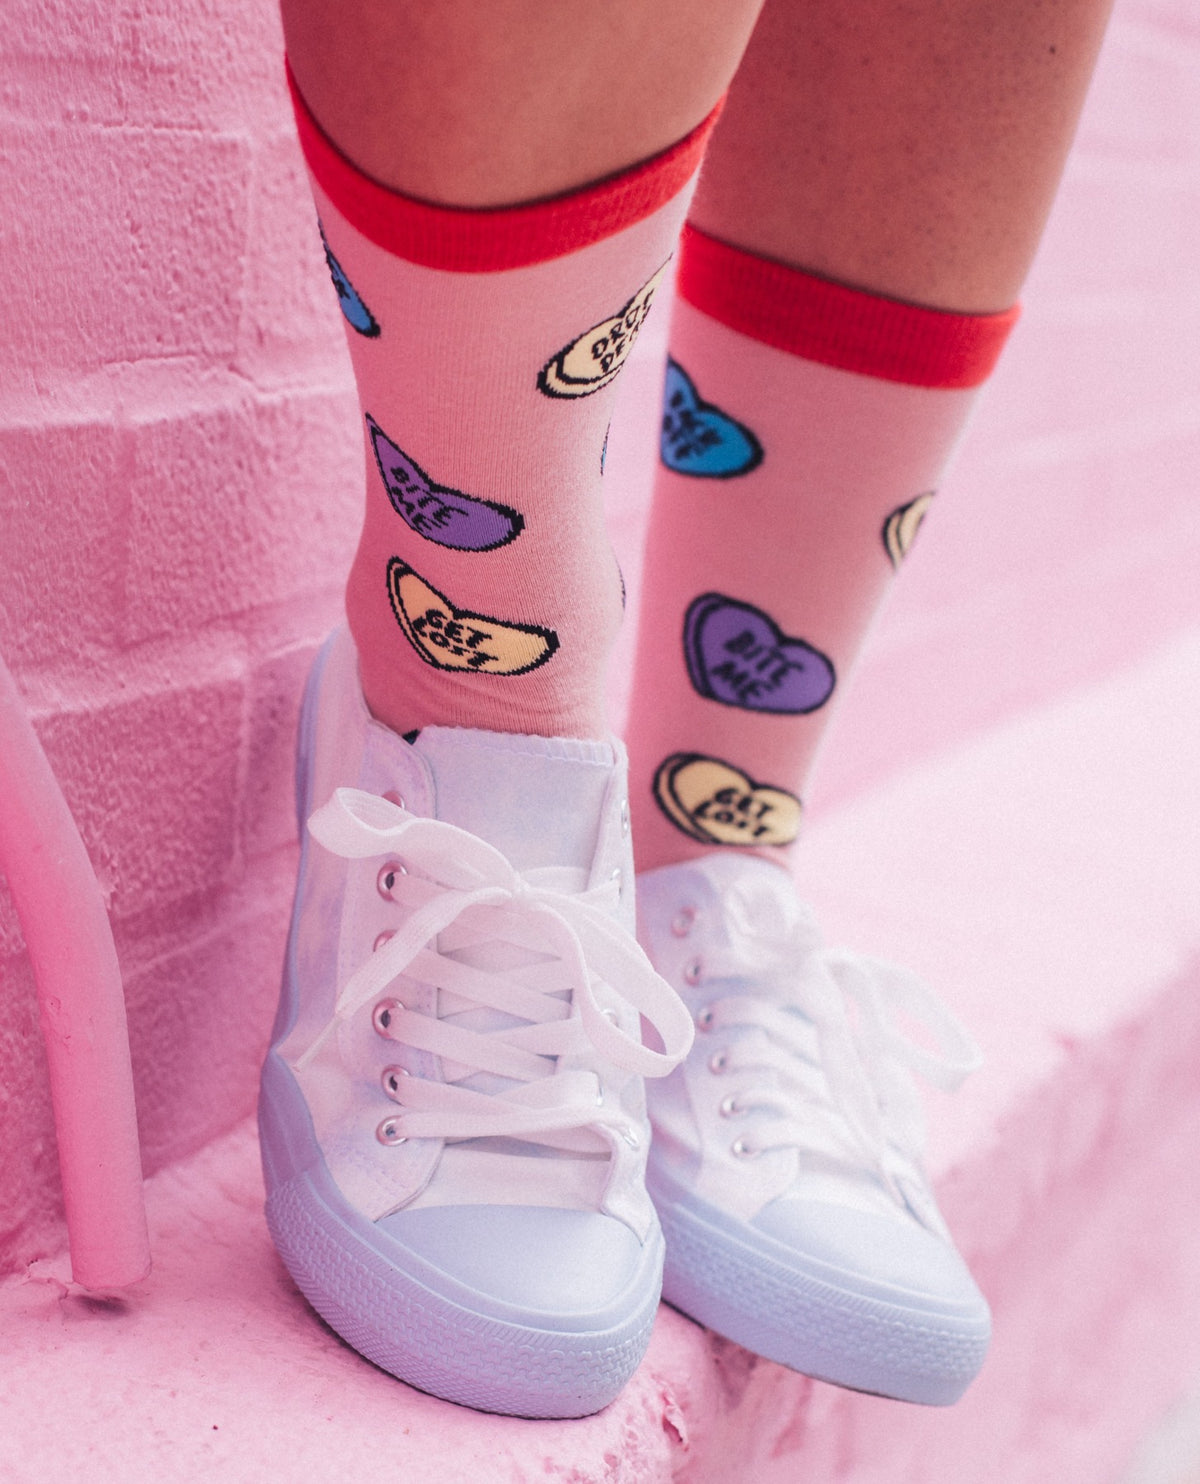 Womens Offensive Candy Hearts Socks